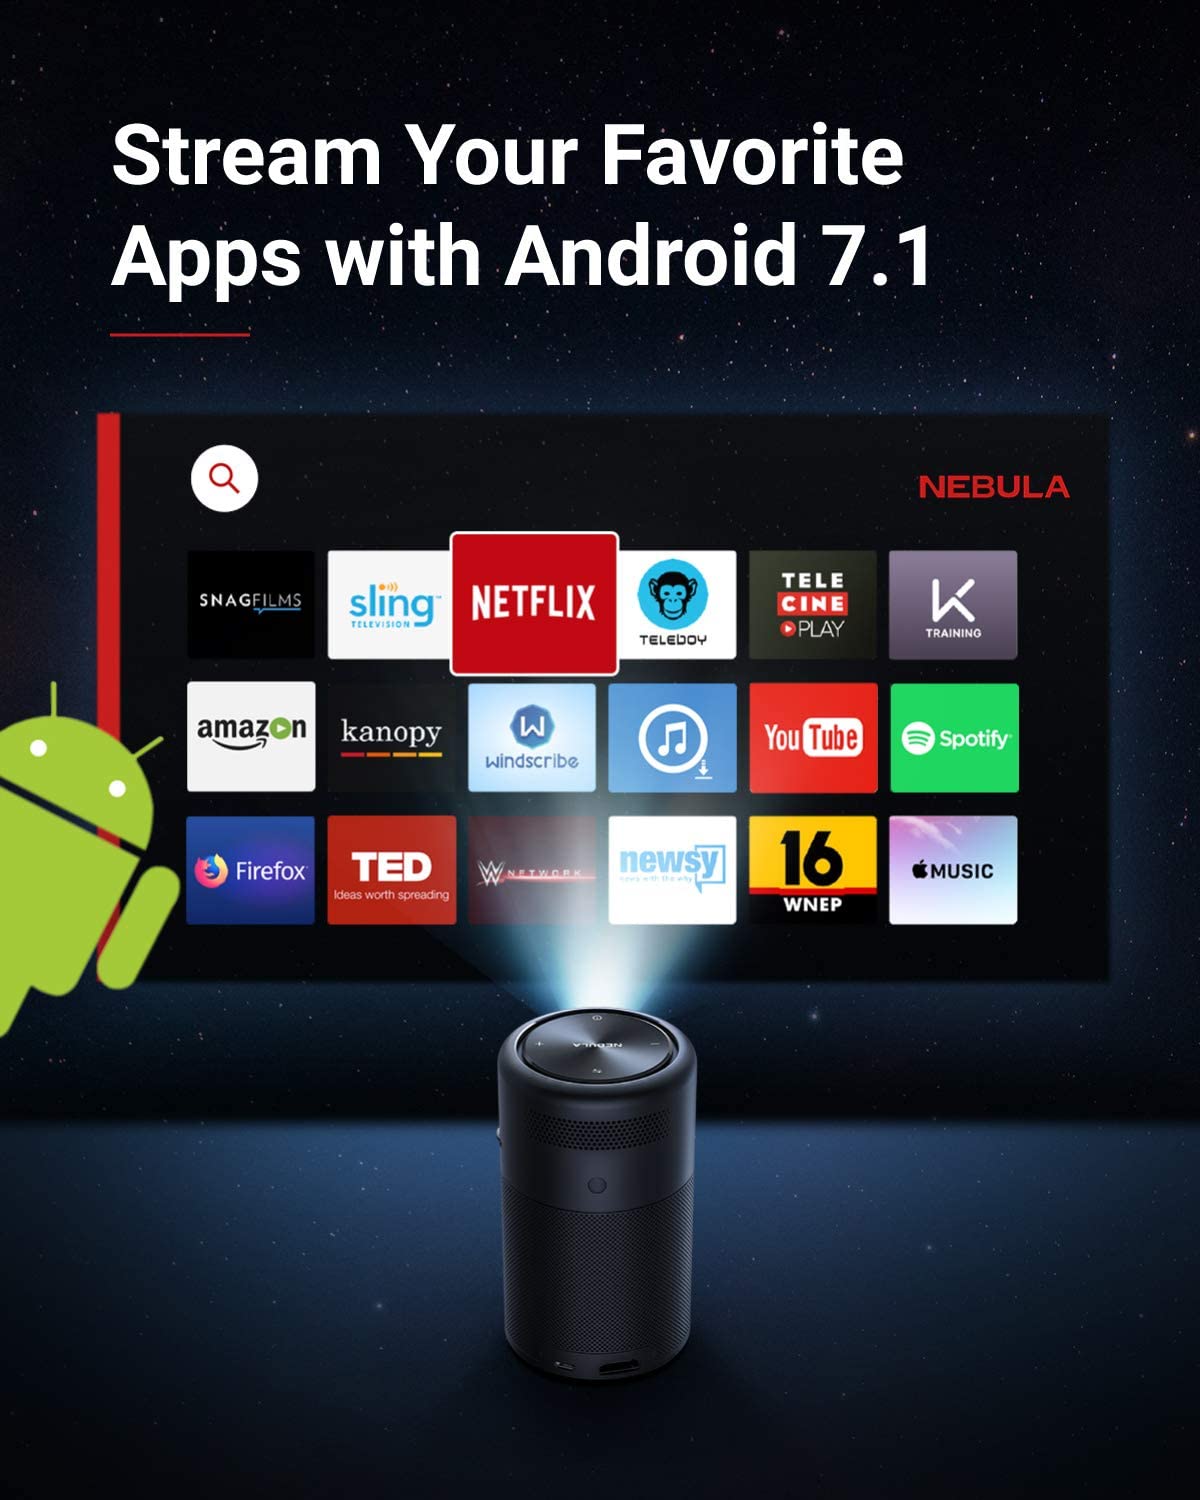 A Capsule portable projector displays several apps while the Android logo peeks from outside the screen.